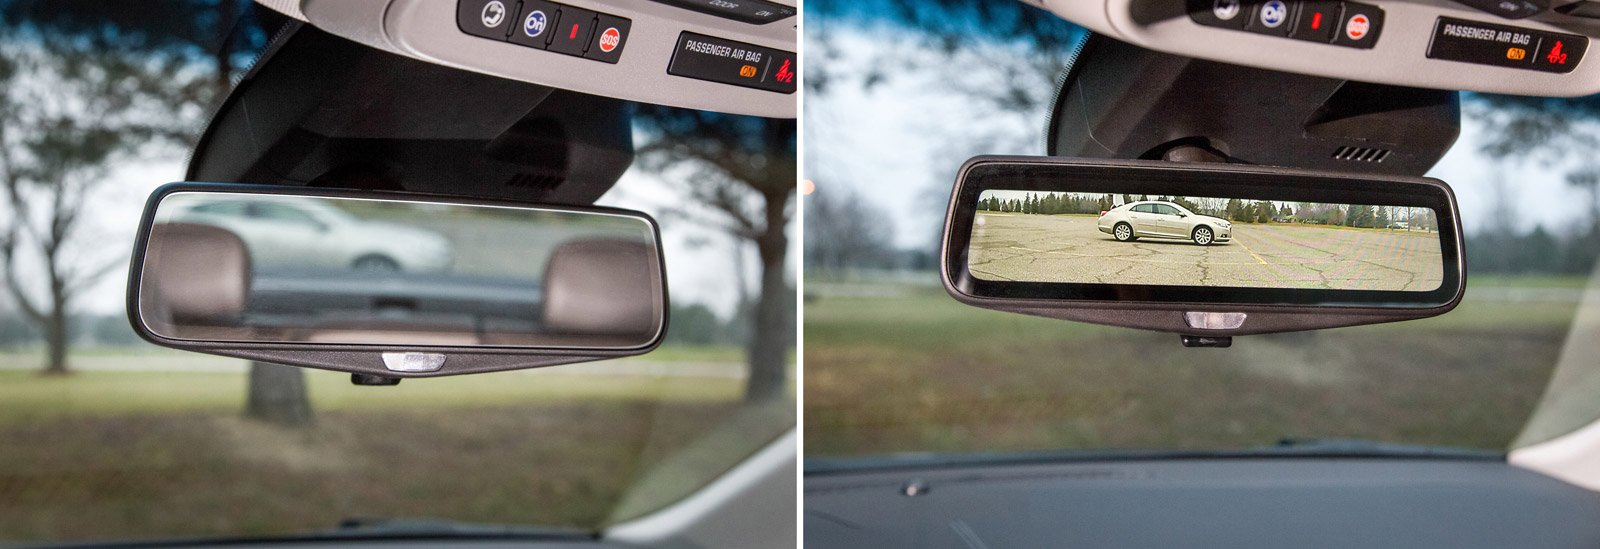 streaming-video-rearview-mirror-from-the-2016-cadillac-ct6_100494755_h